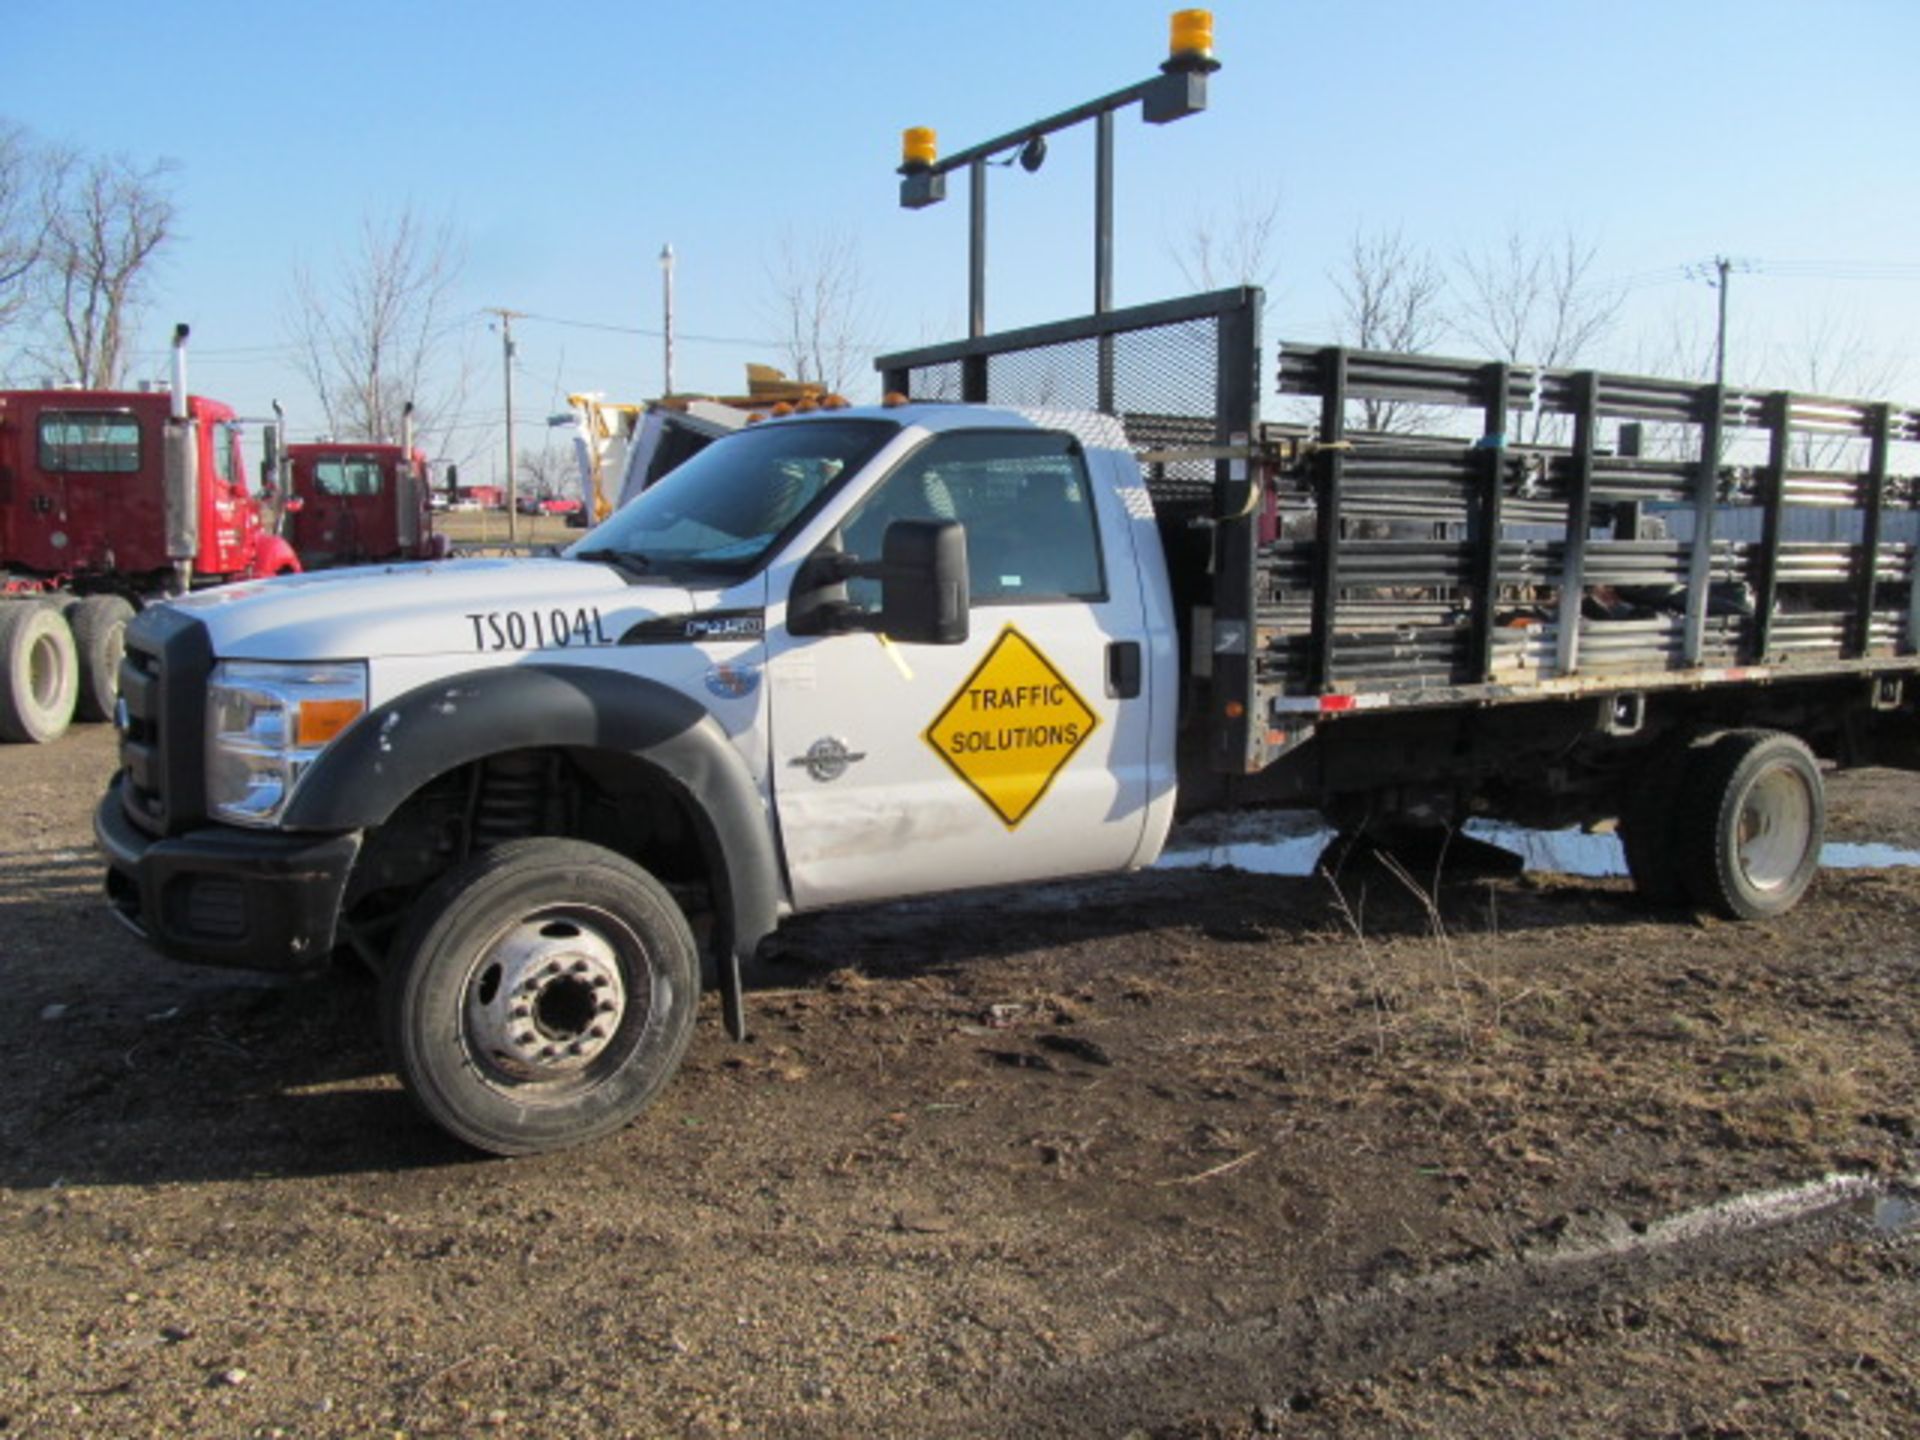 2012 Ford F450 Stakebed Truck with Lift Gate (VIN: 1FDUFGT0CEB54699) [Estimated Mileage: 105698.